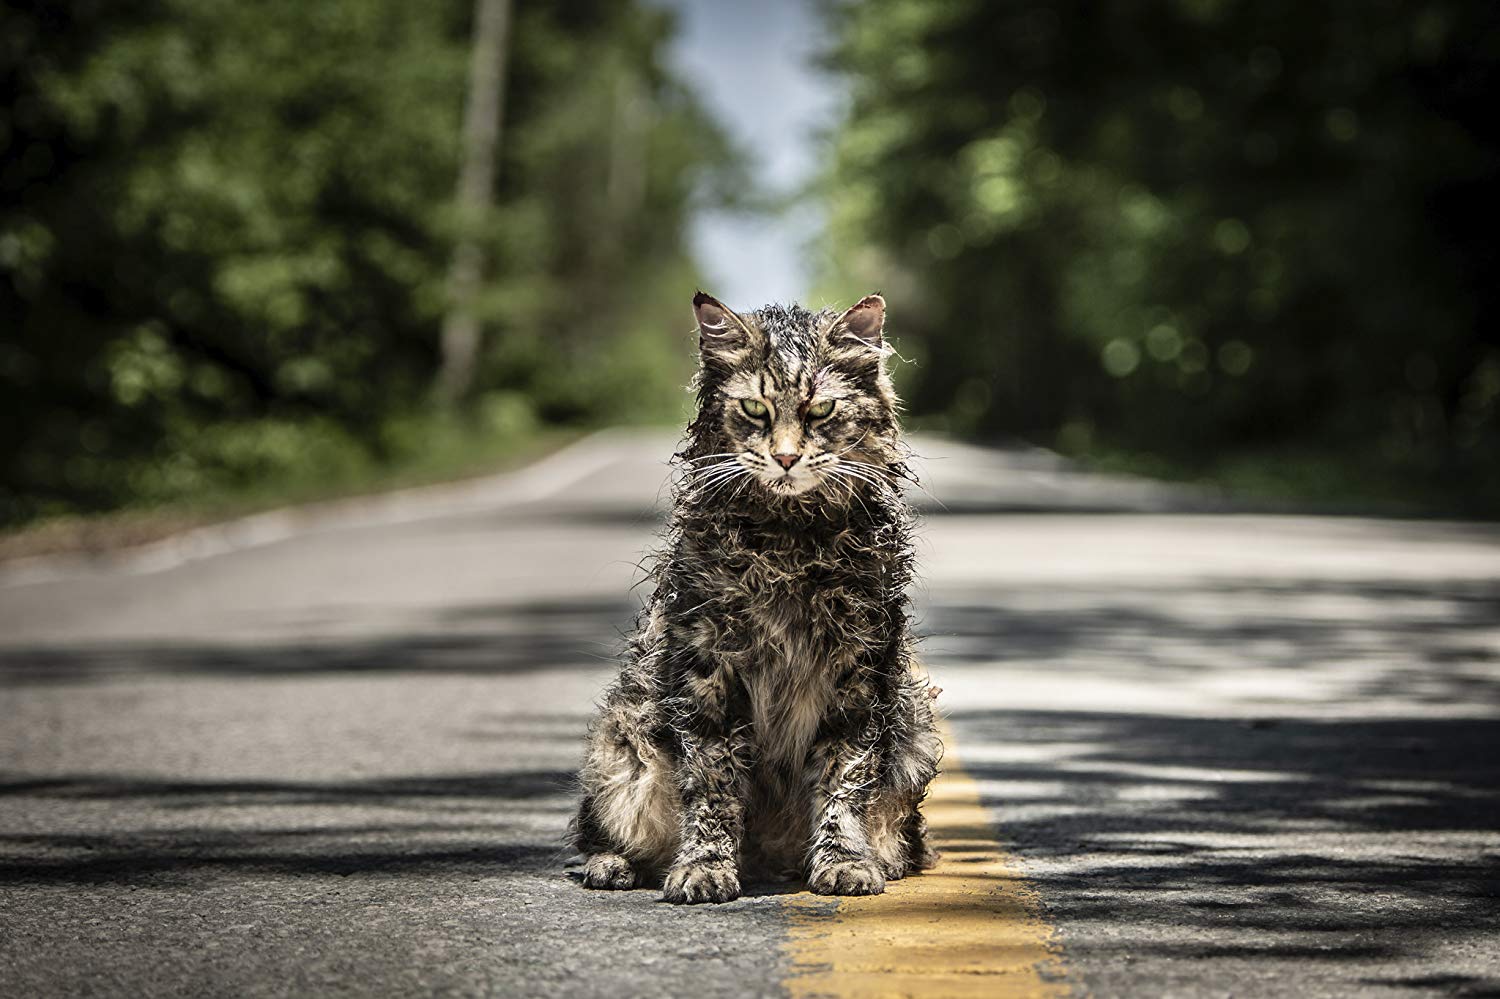 Sometimes dead is better - Pet Sematary (2019)